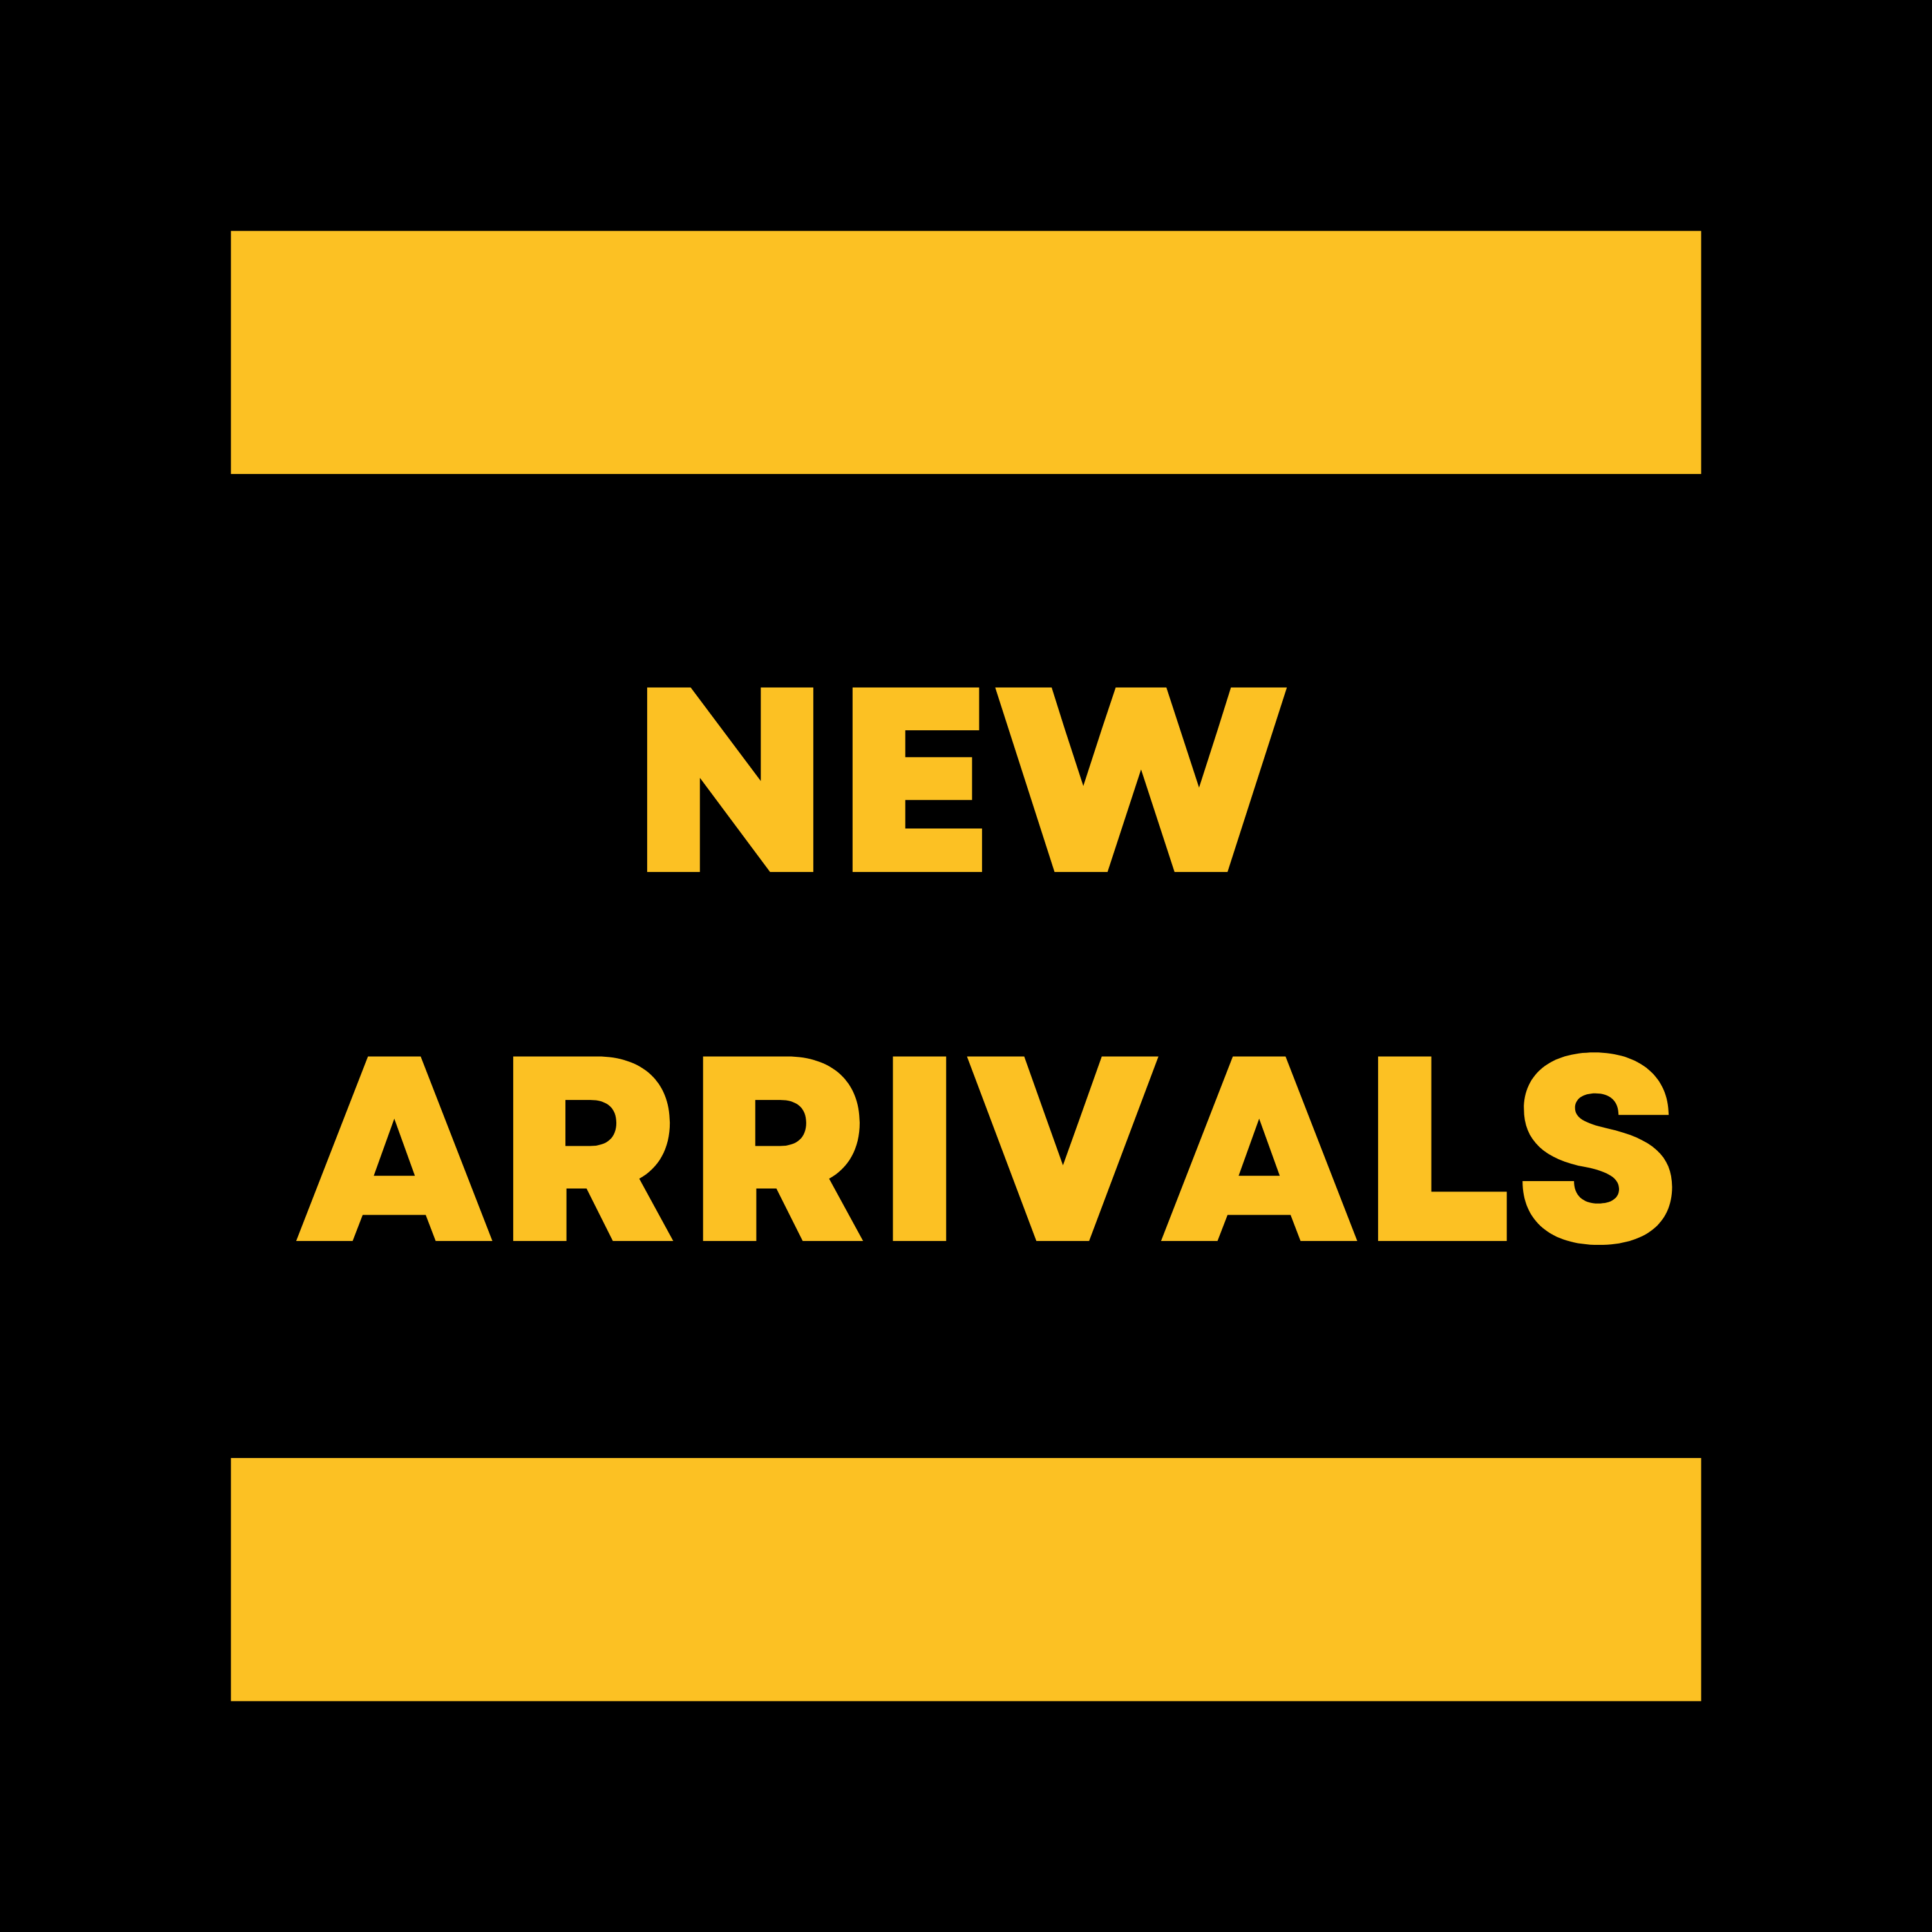 Black image with yellow text that reads new arrivals